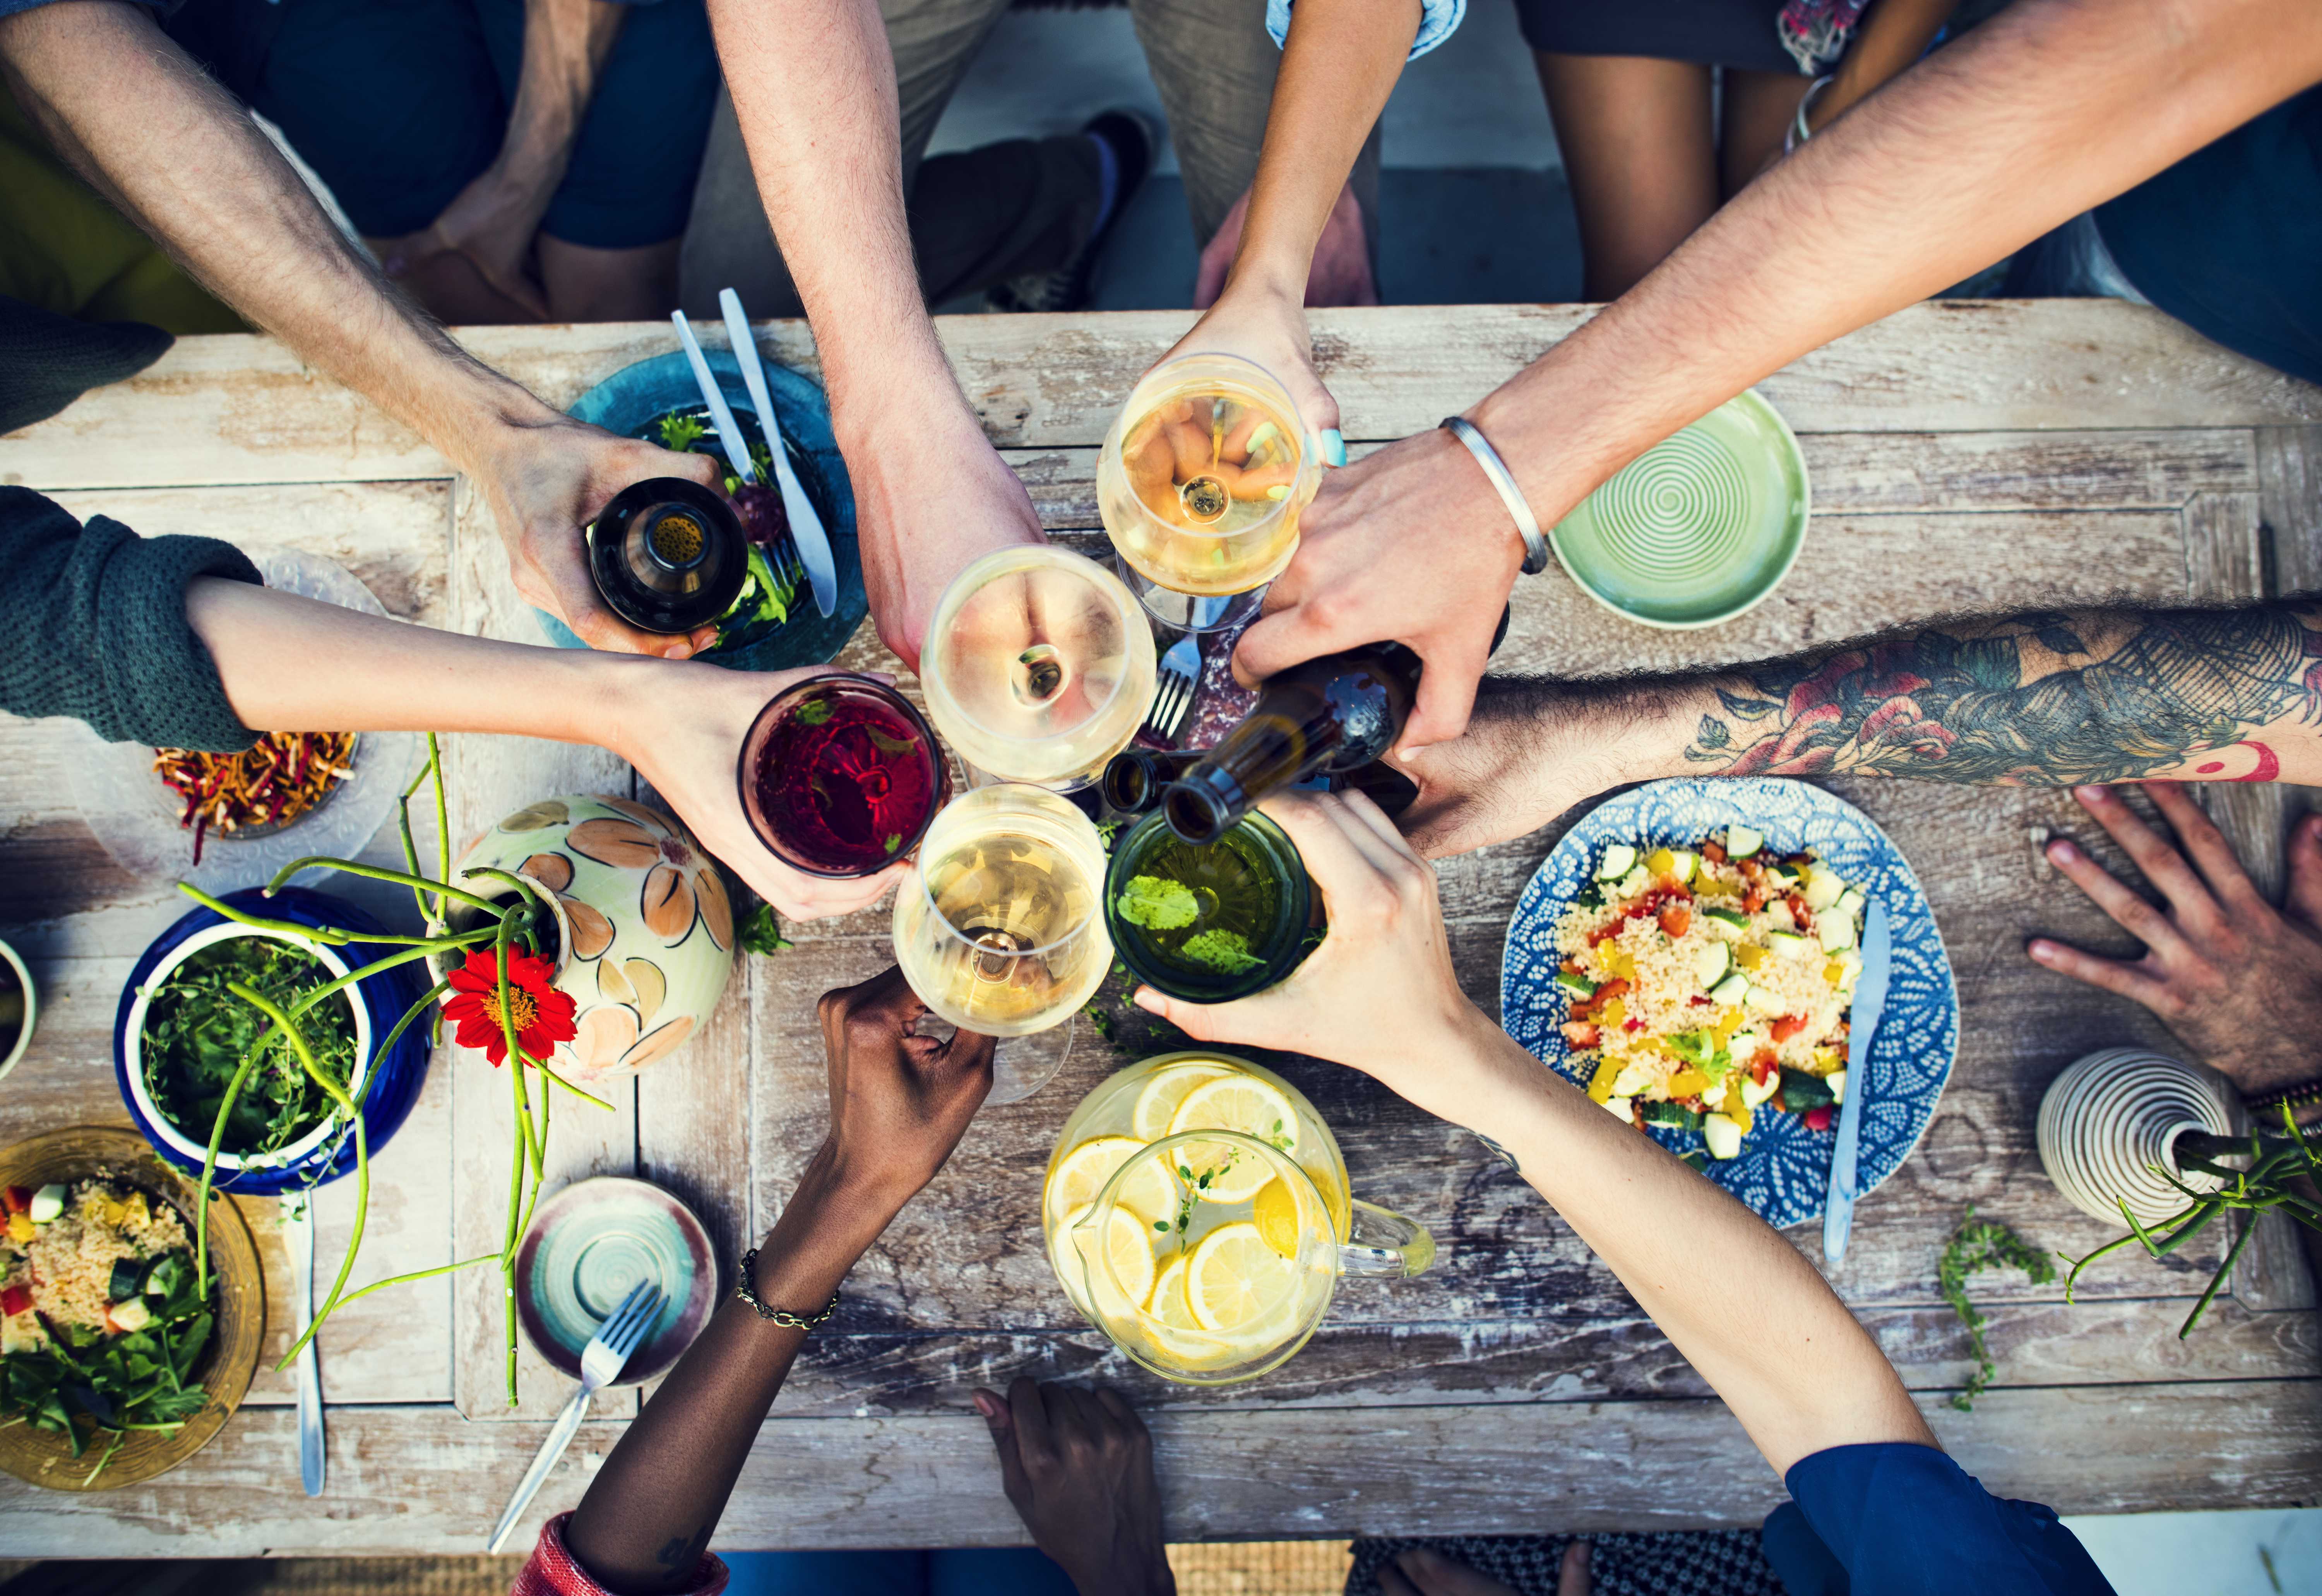 Grab the Grub: Choosing the Right Food for Your Party